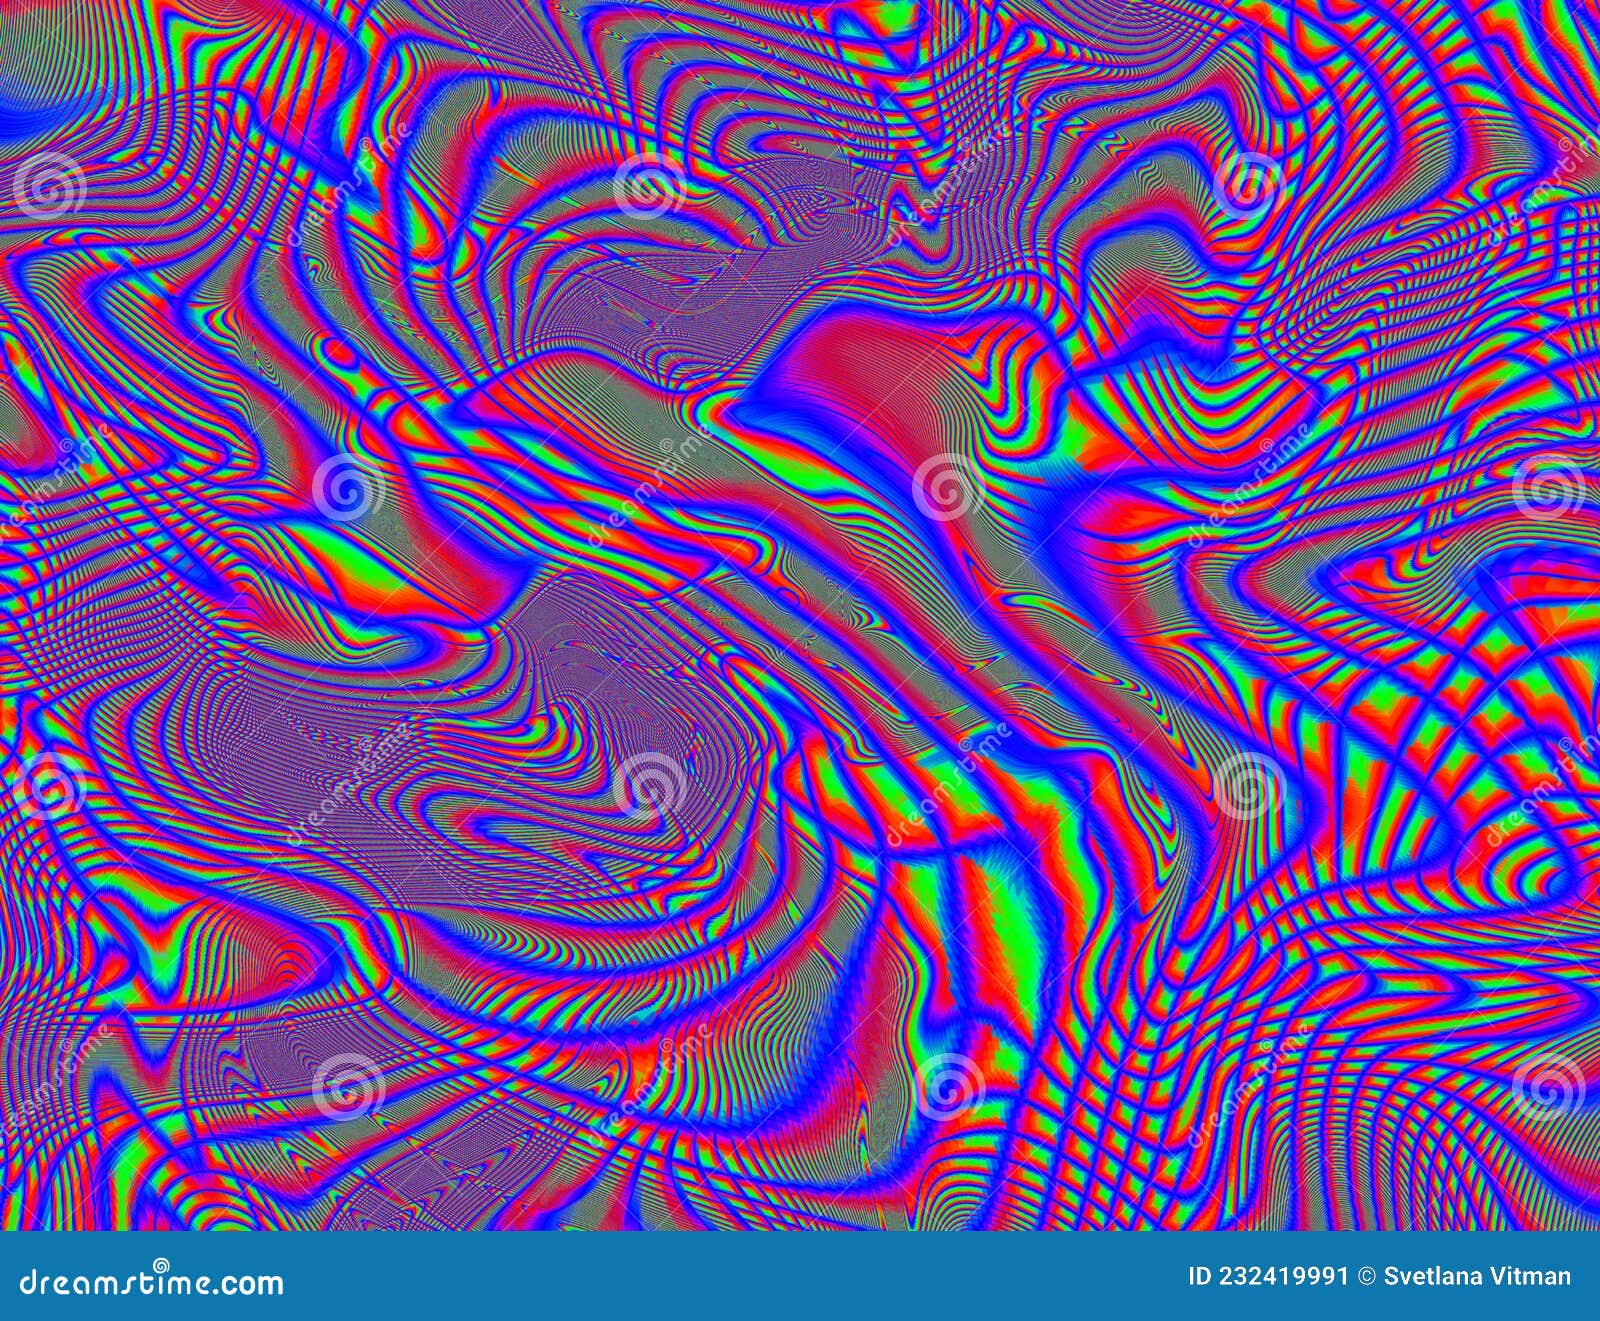 Hippie Trippy Psychedelic Rainbow Background LSD Colorful Wallpaper.  Abstract Hypnotic Illusion Stock Illustration - Illustration of rainbow,  hippie: 232419991